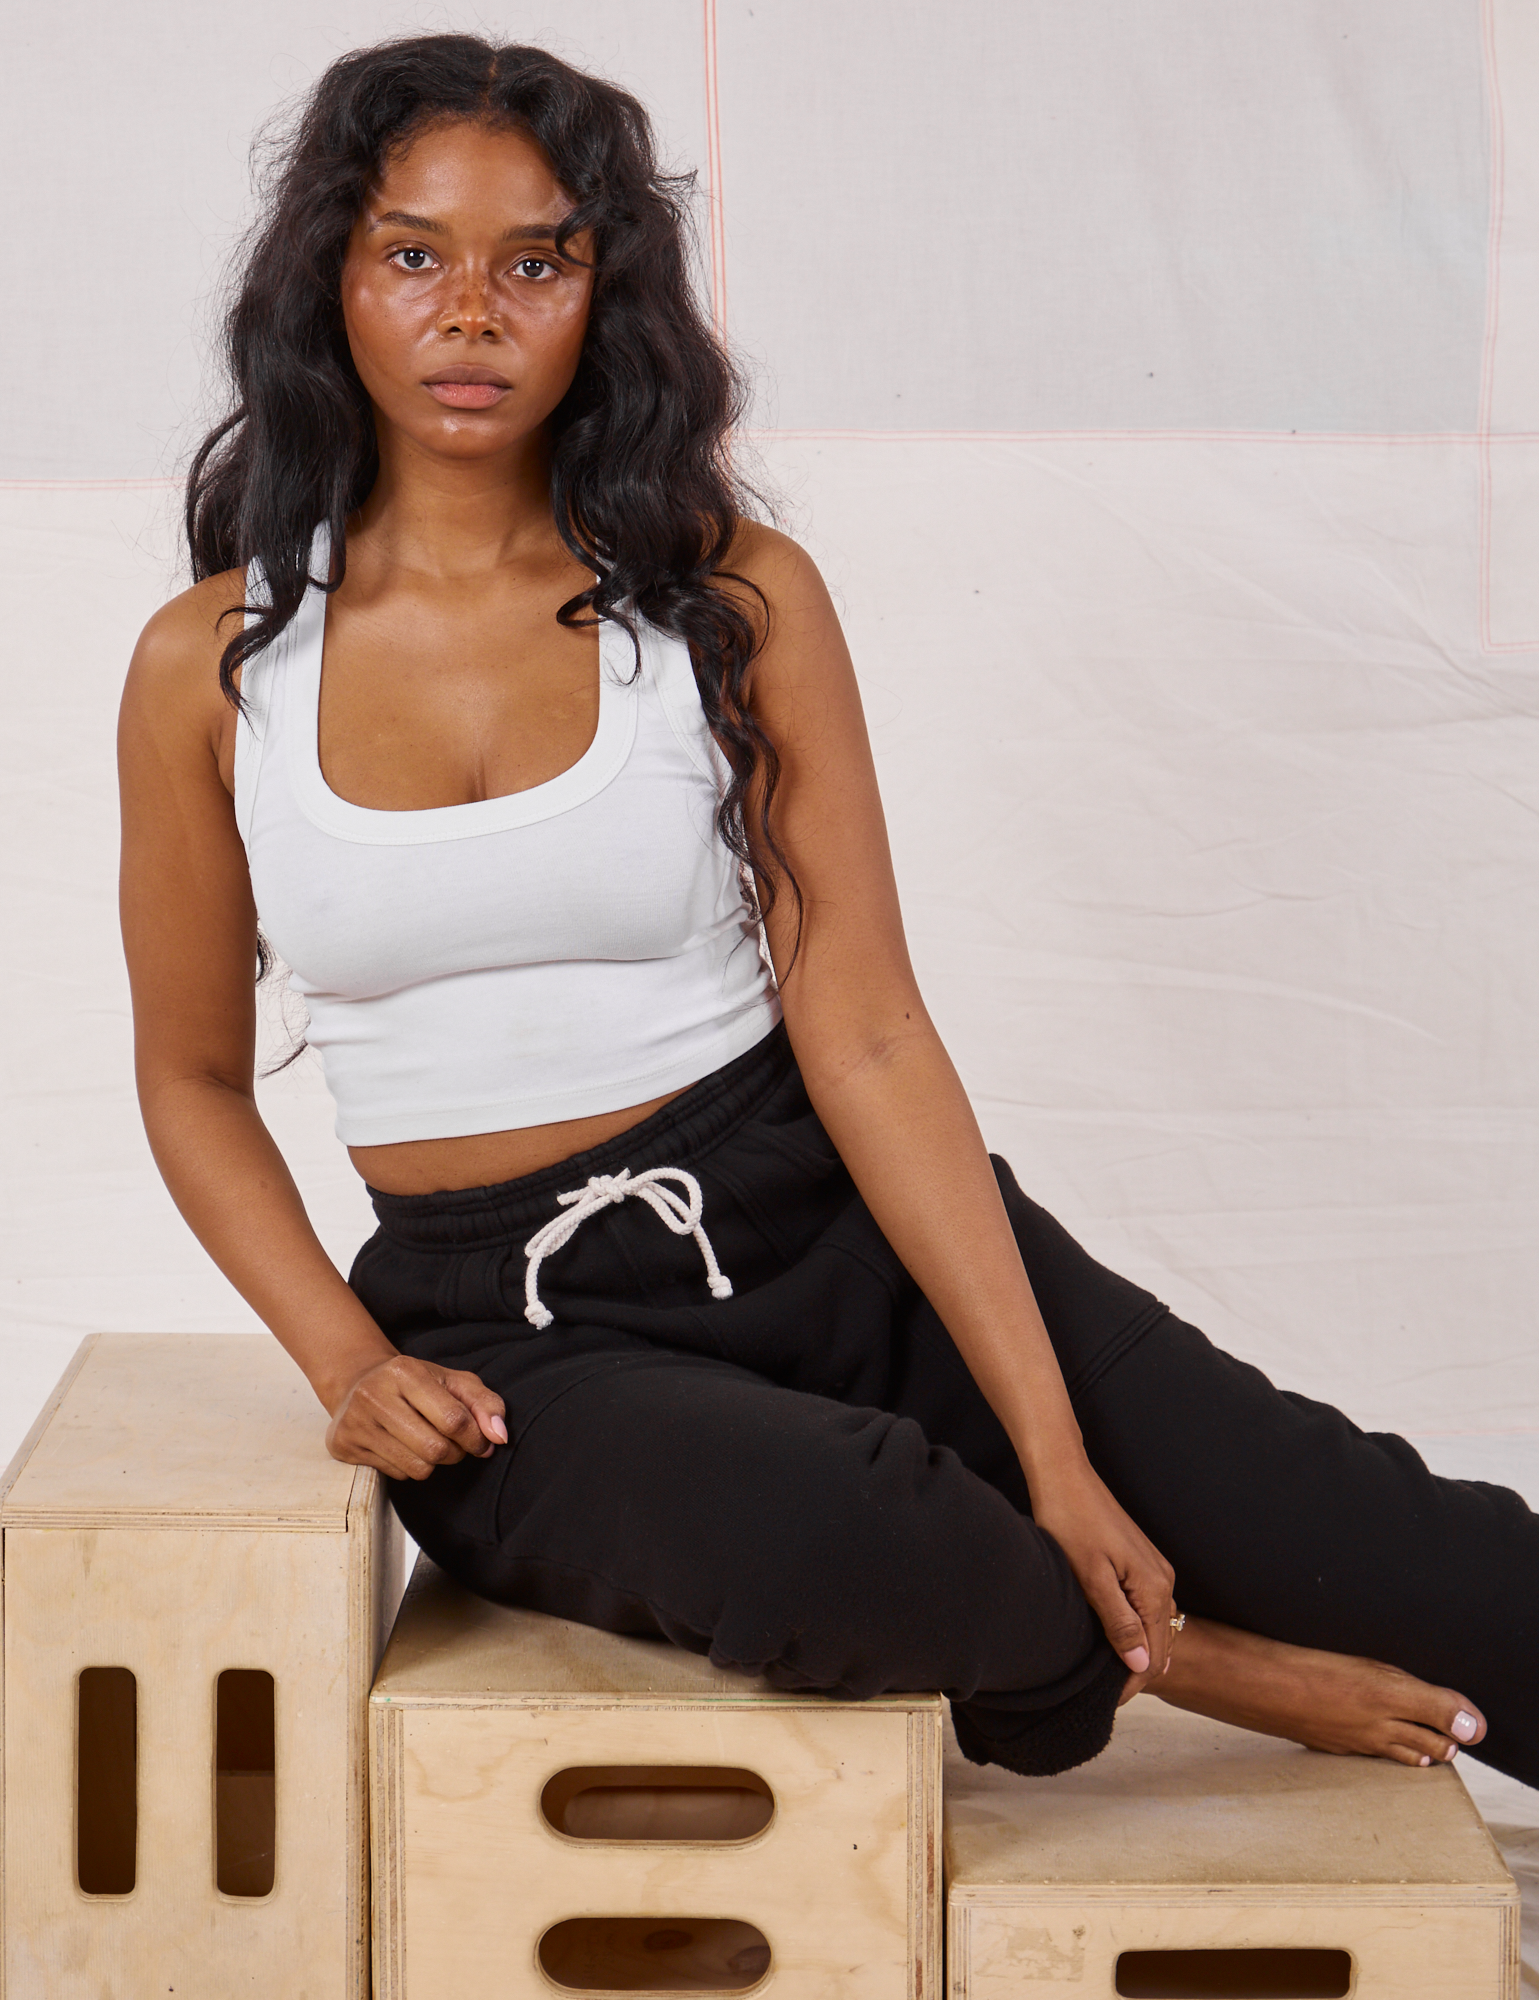 Kandia is wearing Rolled Cuff Sweat Pants in Basic Black and vintage off-white Cropped Tank Top